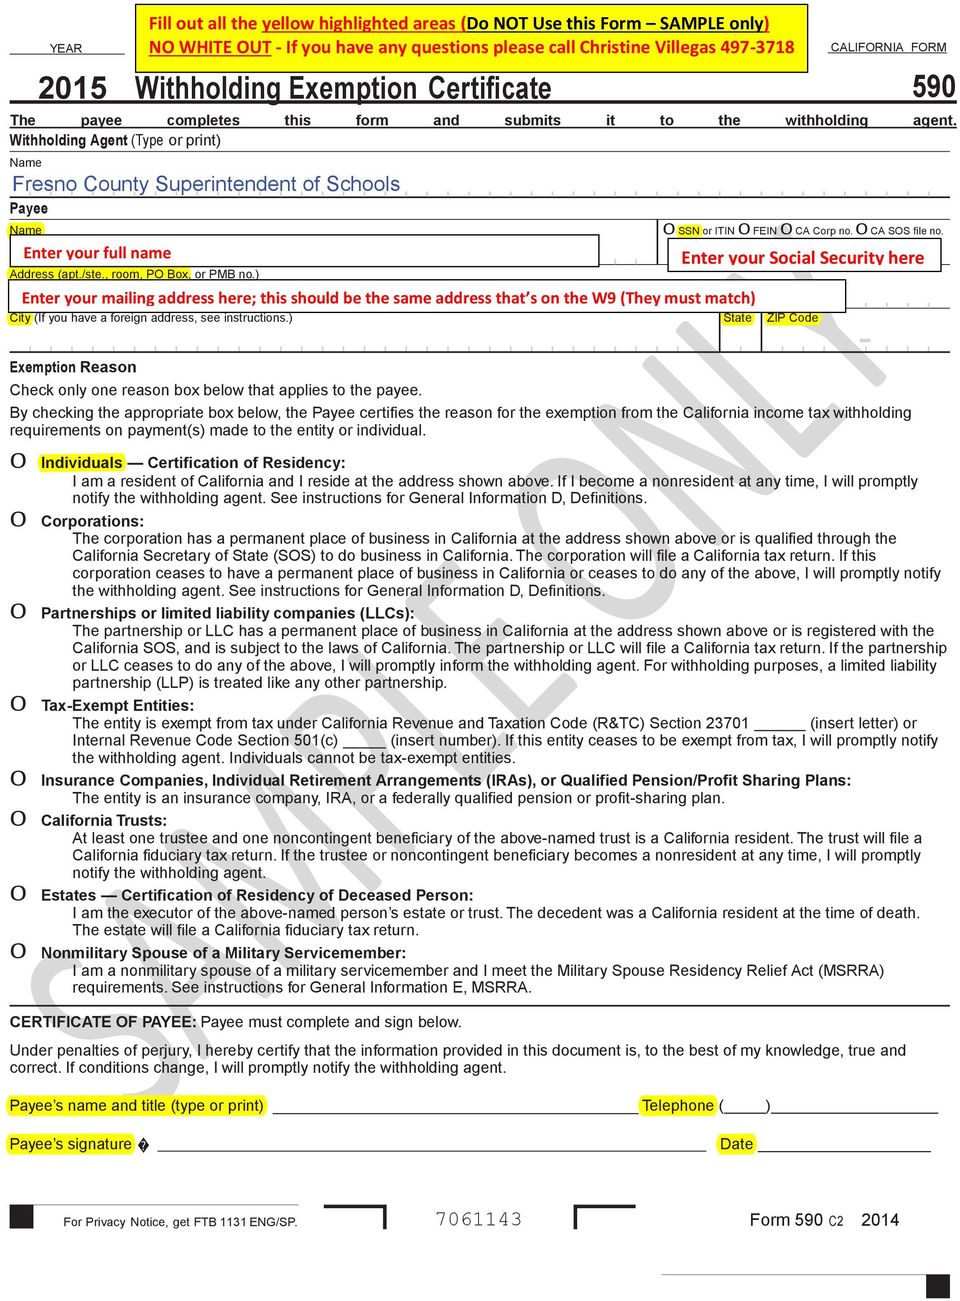 ) Fill out all the yellow highlighted areas (Do NOT Use this Form SAMPLE only) NO WHITE OUT - If you have any questions please call Christine Villegas 497-3718 Enter your mailing address here; this